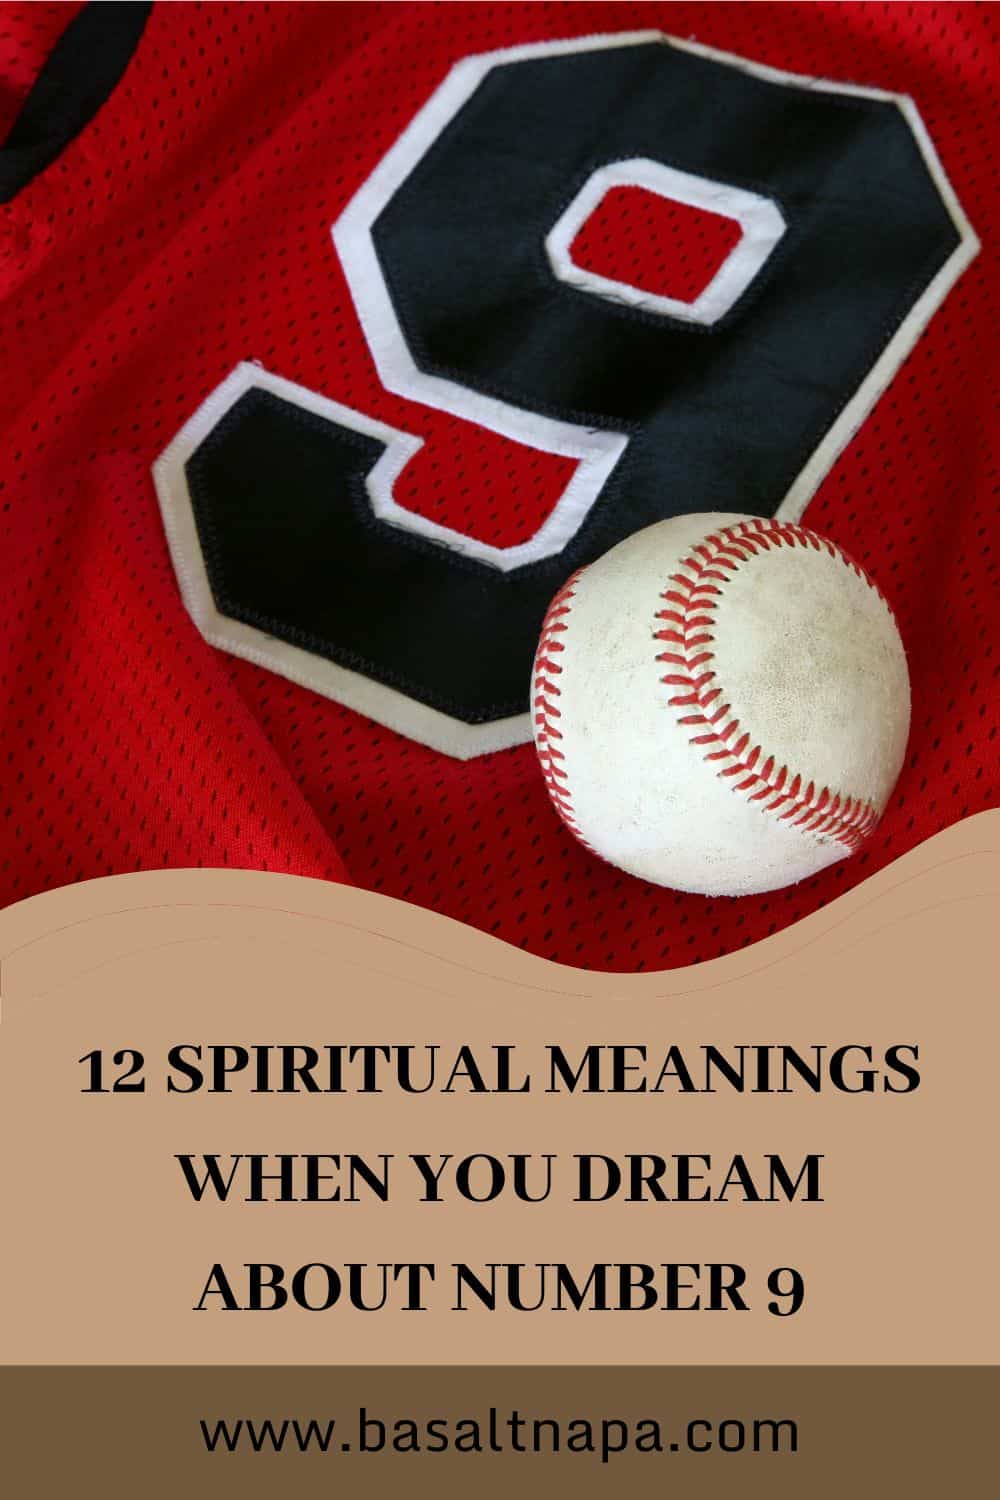 12 Spiritual Meanings When You Dream About Number 9